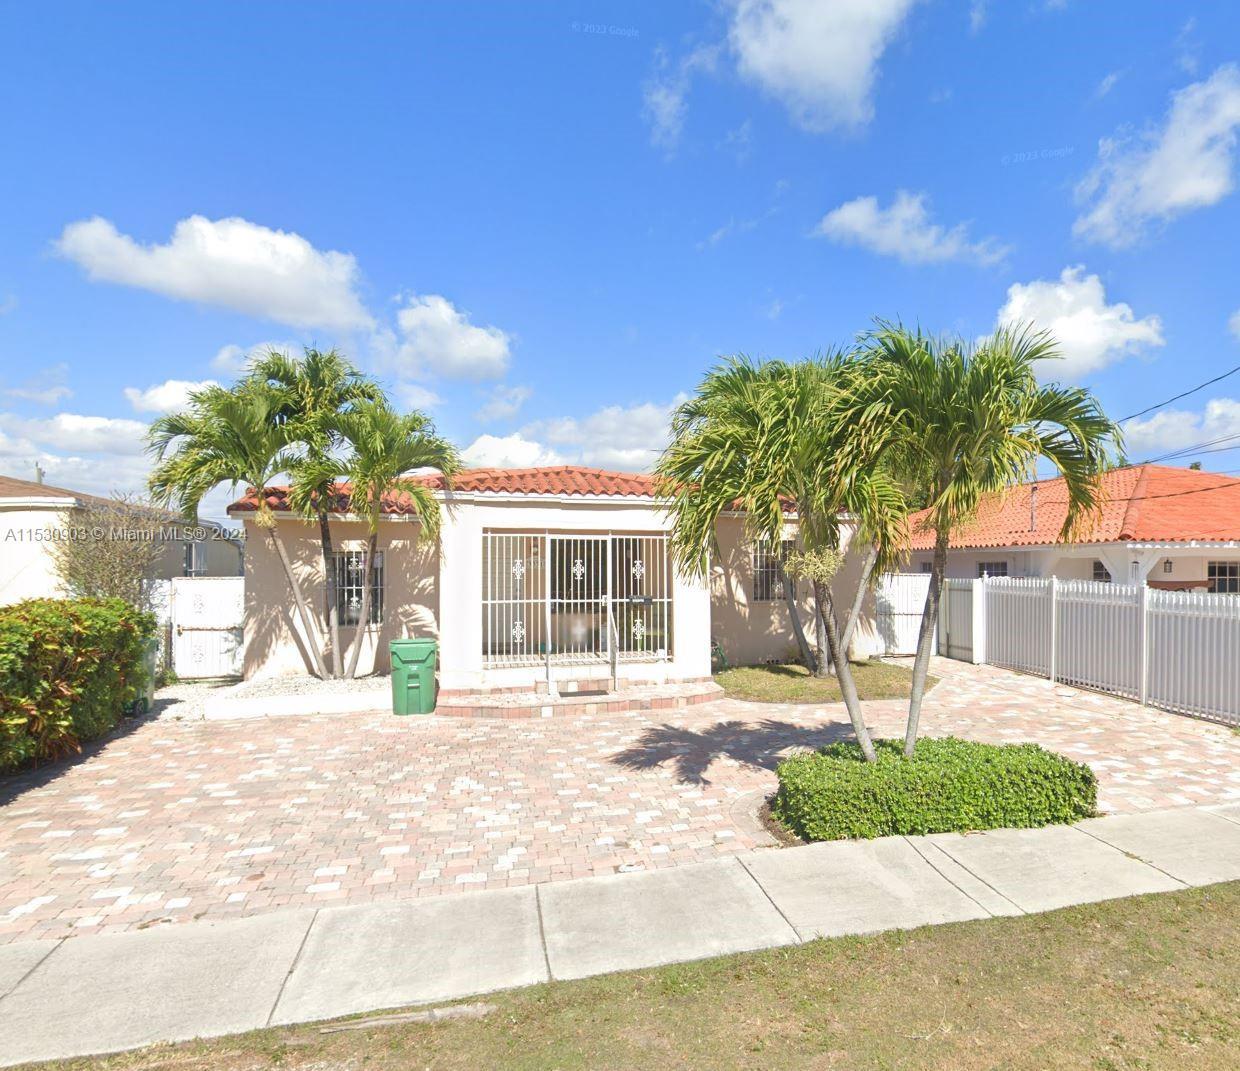 Photo of 3331 NW 18 St in Miami, FL